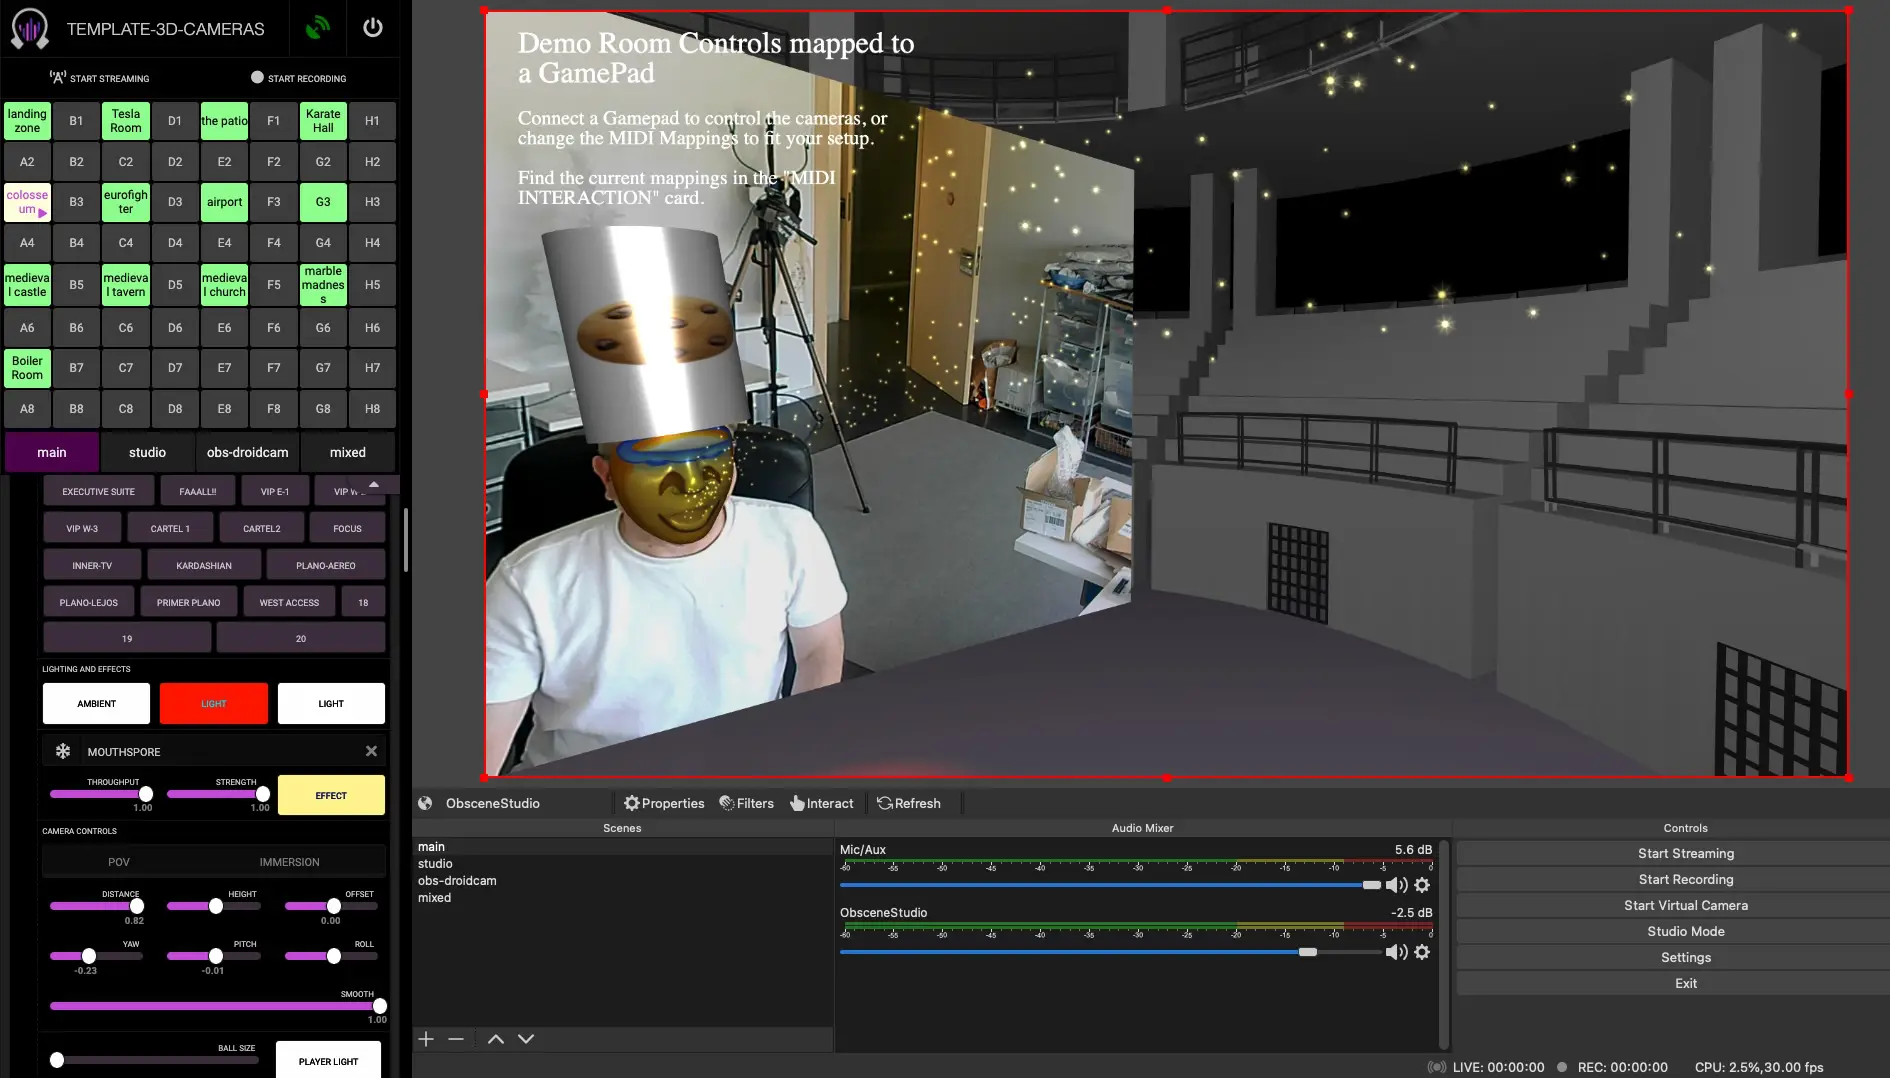 Obscene Studio Player alongside OBS Studio during a 3D Livestreaming session. From top to bottom of the Side panel: Scene Map, OBS Scenes, 3D Camera Presets, Lighting, Particle effects, Camera Selection and Controls